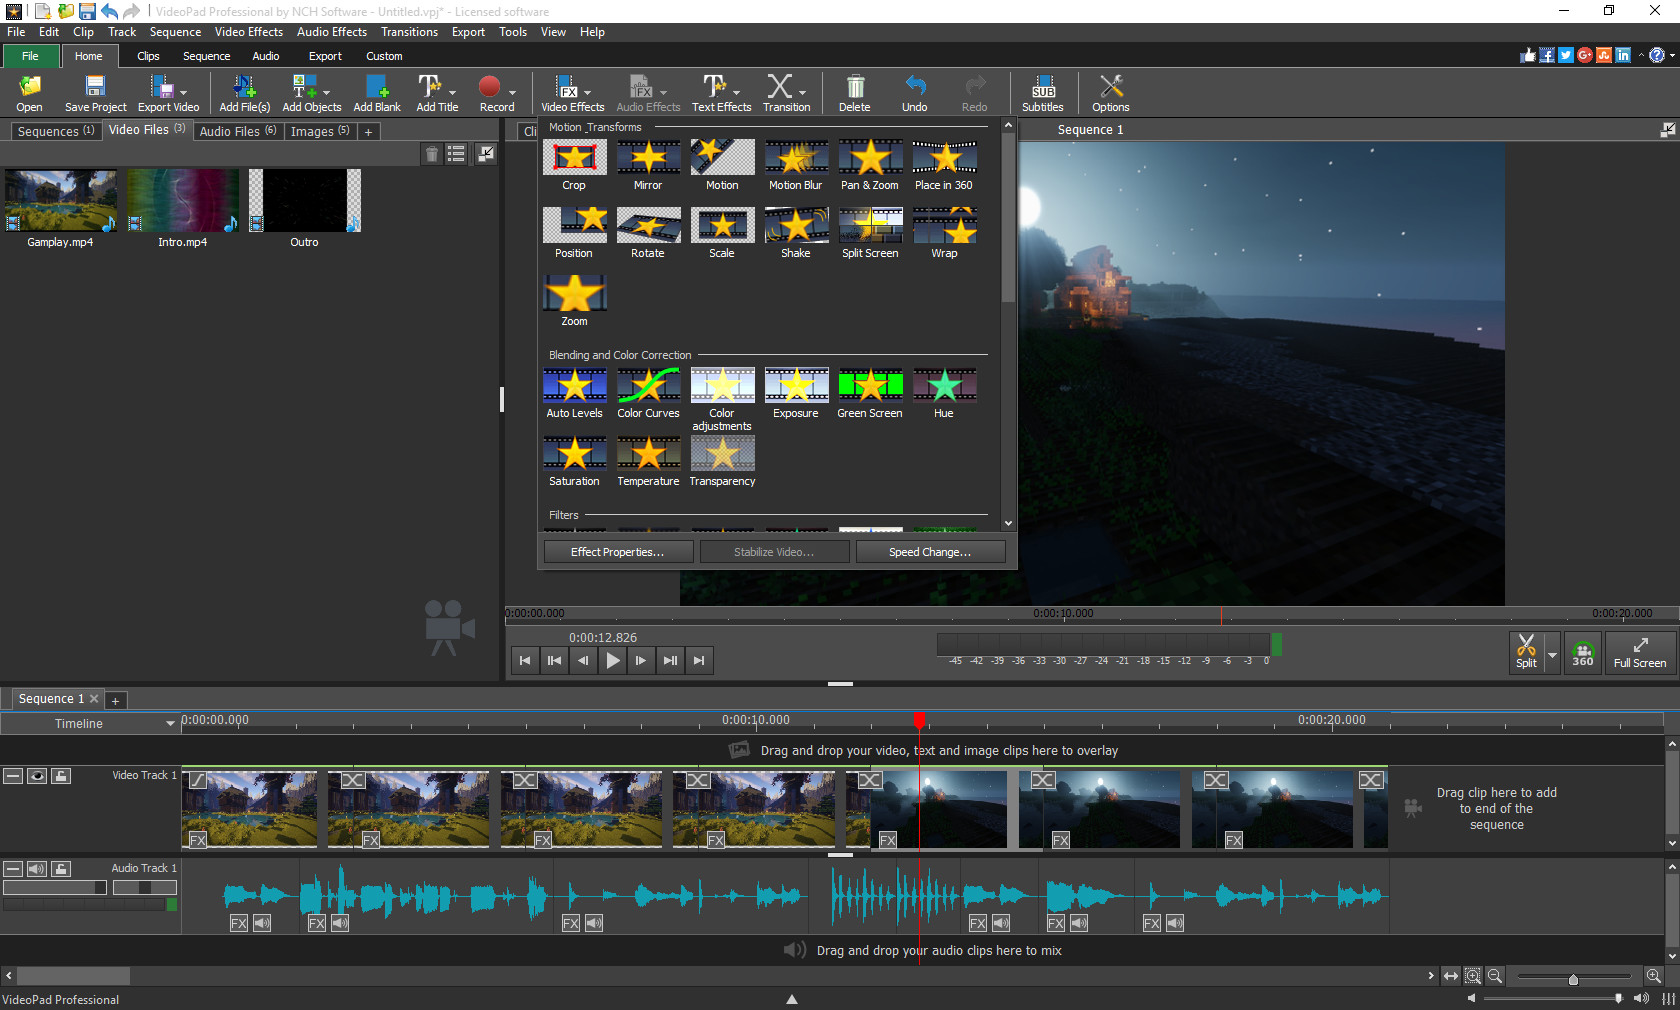 nch software videopad video editor